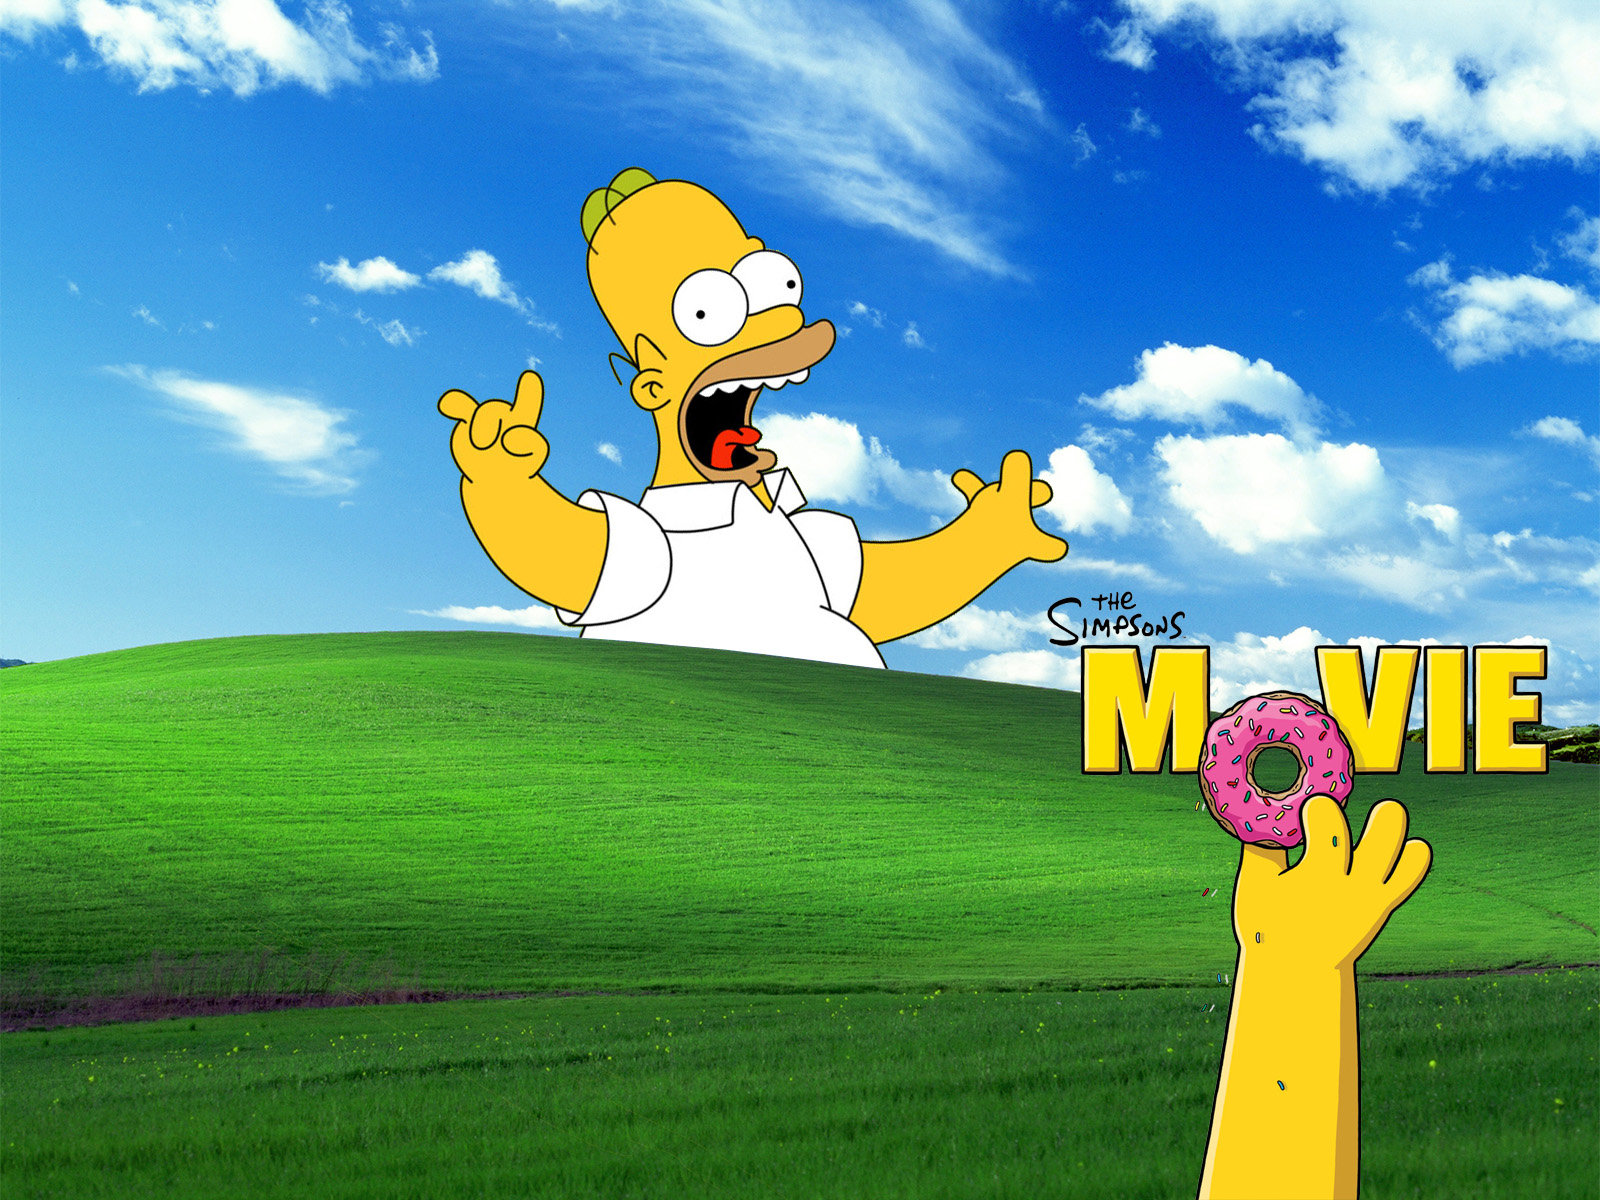 The Simpsons Movie Wallpaper by Mumtazzaidi on